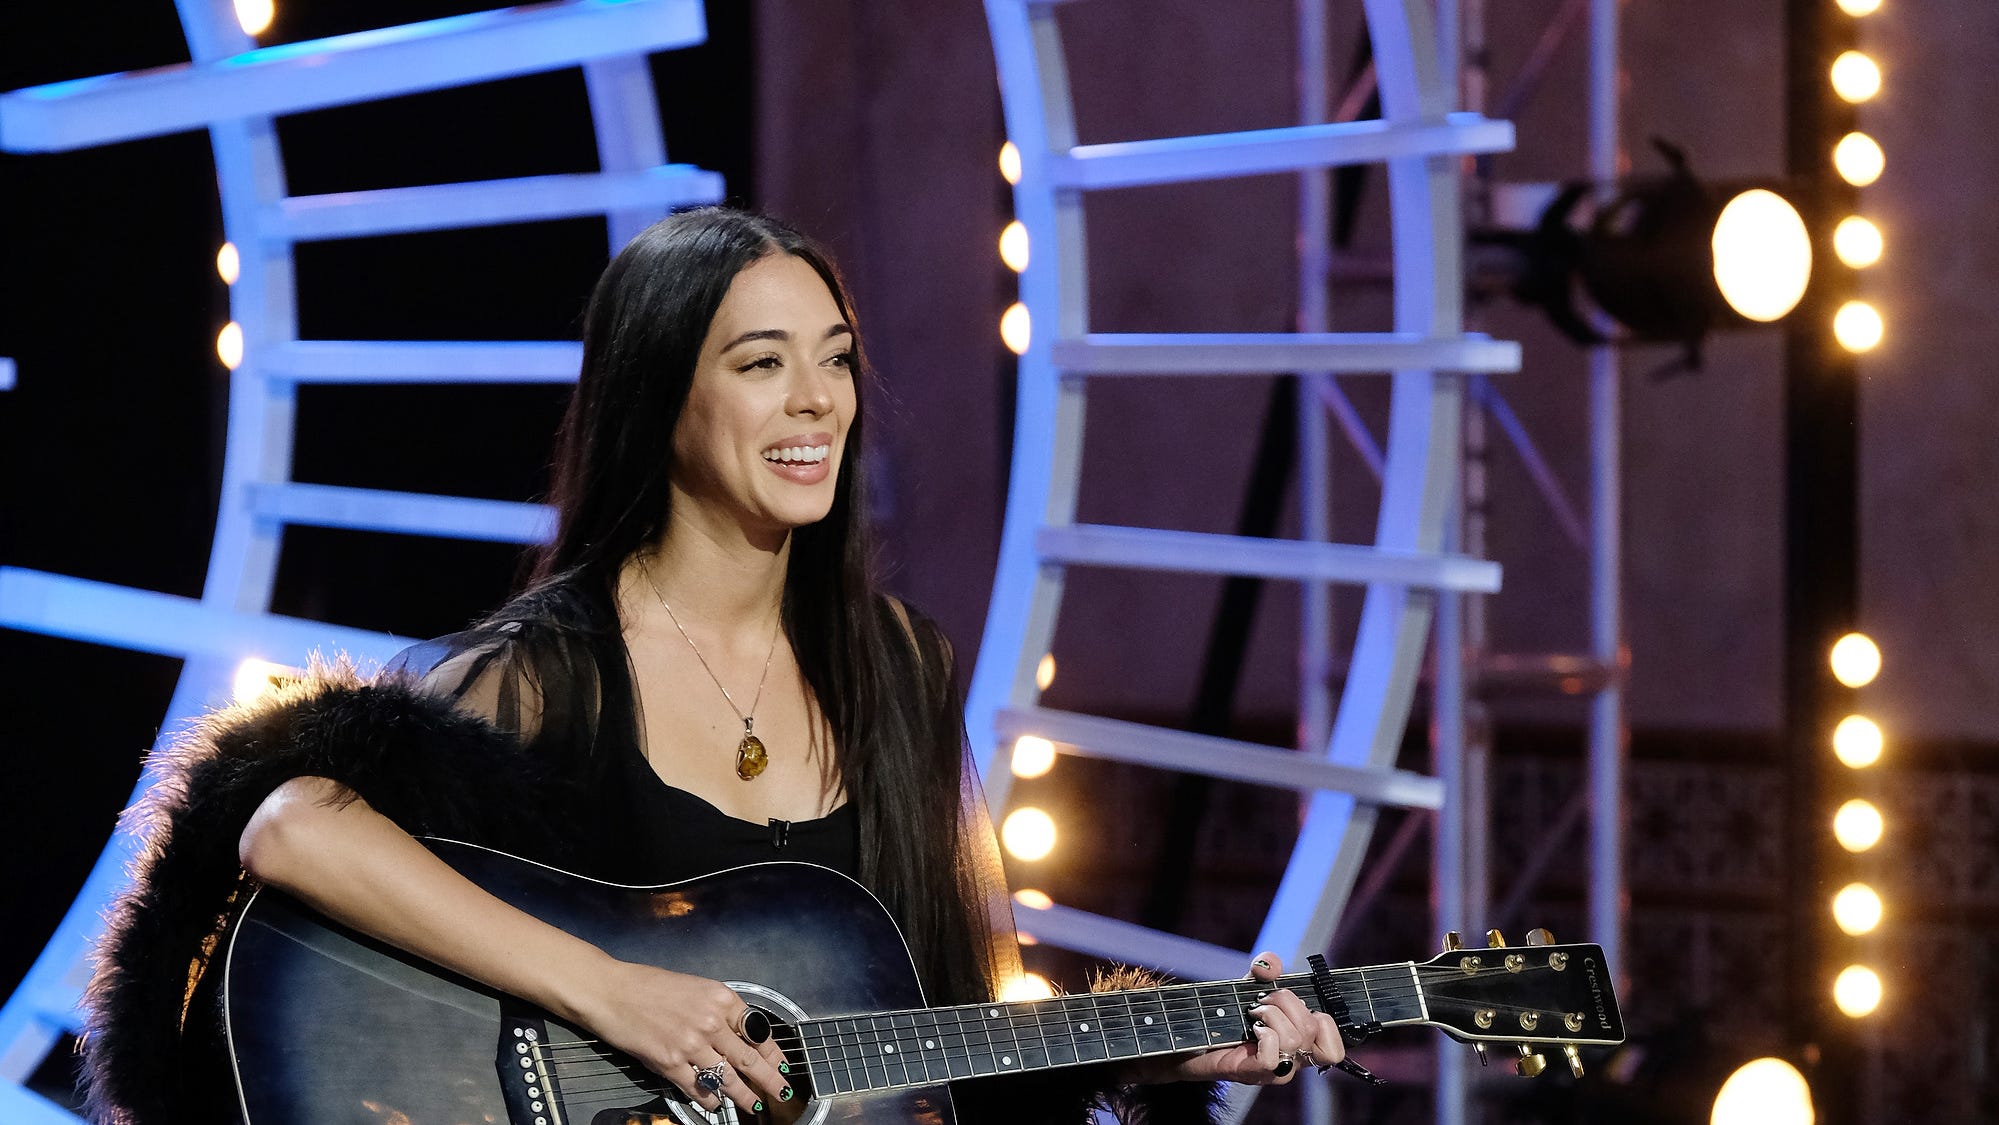 Erika Perry wasn't just trying to prove to the judges she can sing — she was also trying to prove something to her ex-boyfriend, who recently dumped her.